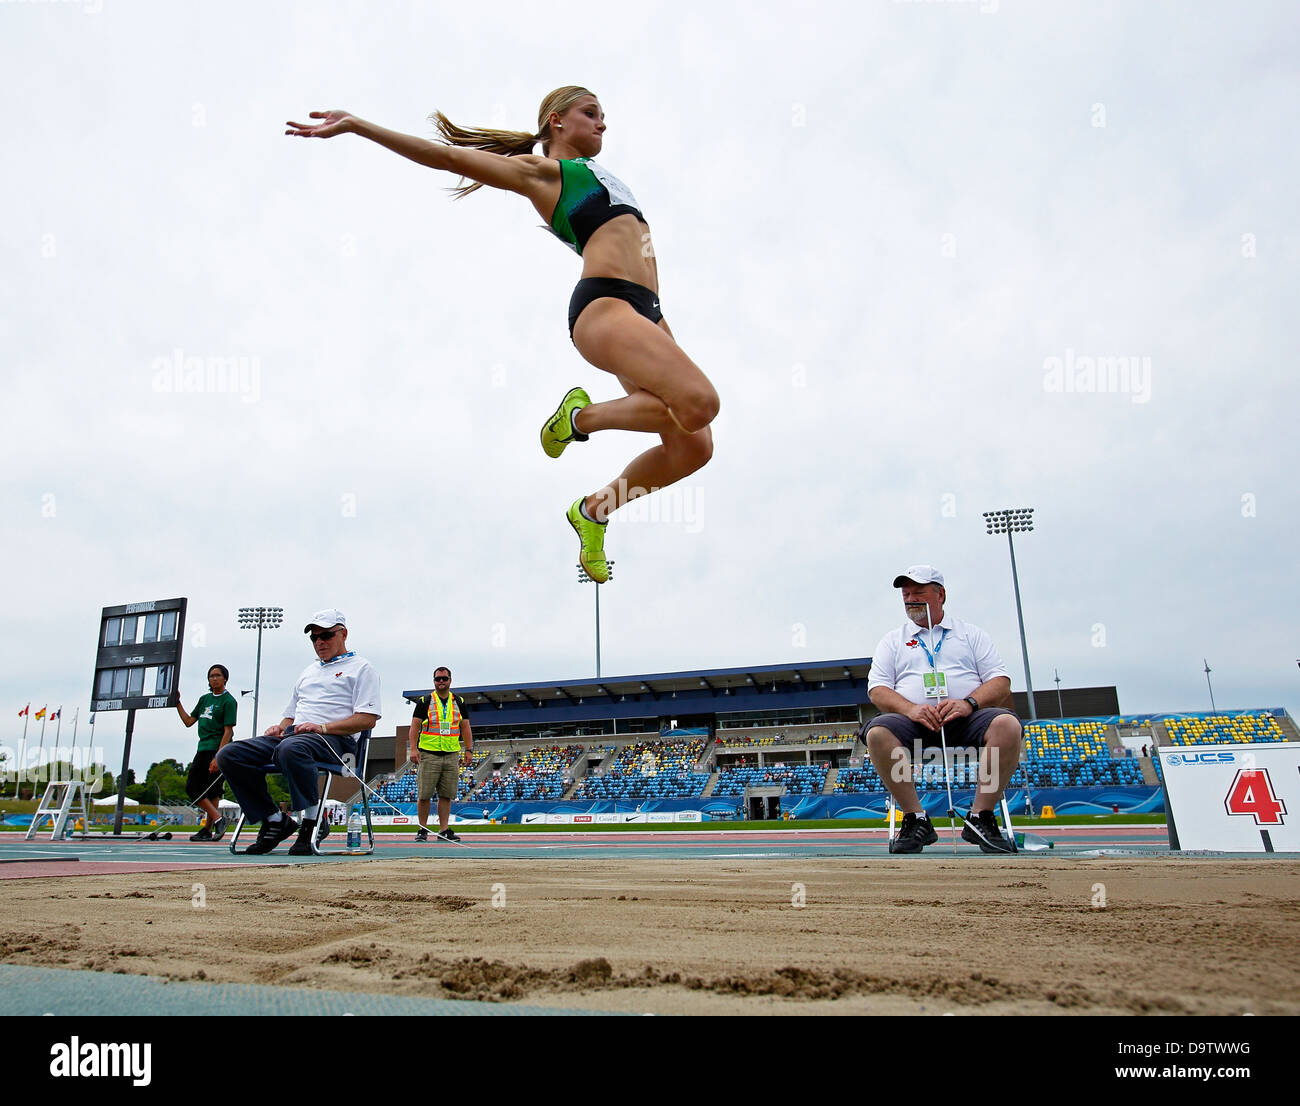 Heptathlon long jumper Brianne Theisen competes at the Canadian Track & Field Championships June 22, 2013 in Moncton, Canada. Stock Photo